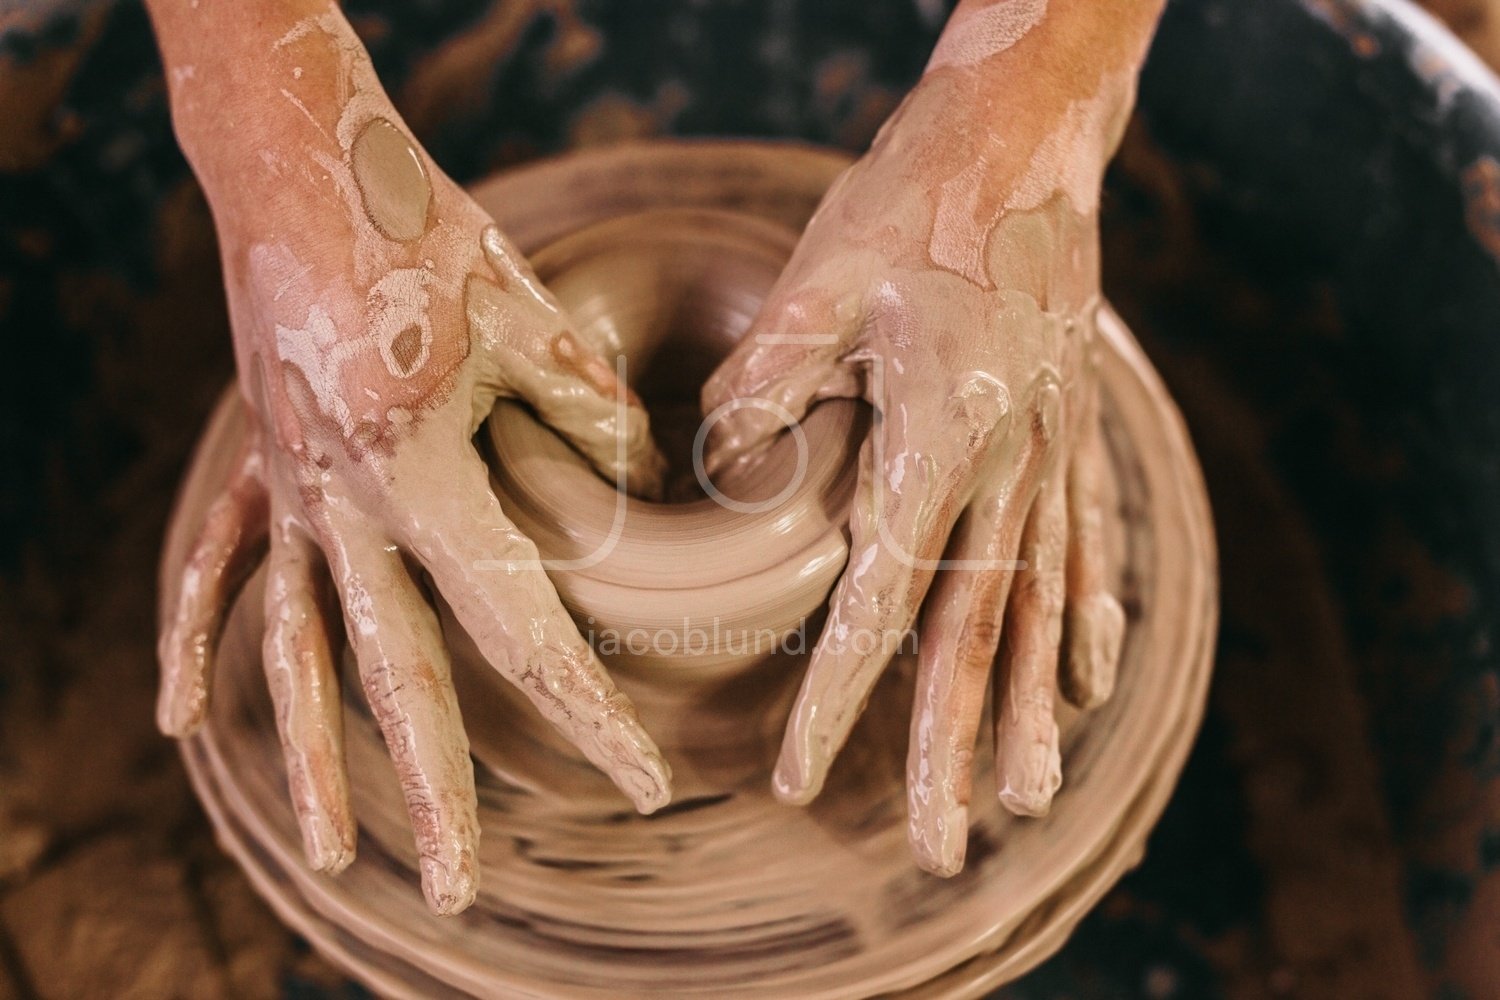 Potter moulding clay on pottery wheel – Jacob Lund Photography Store-  premium stock photo